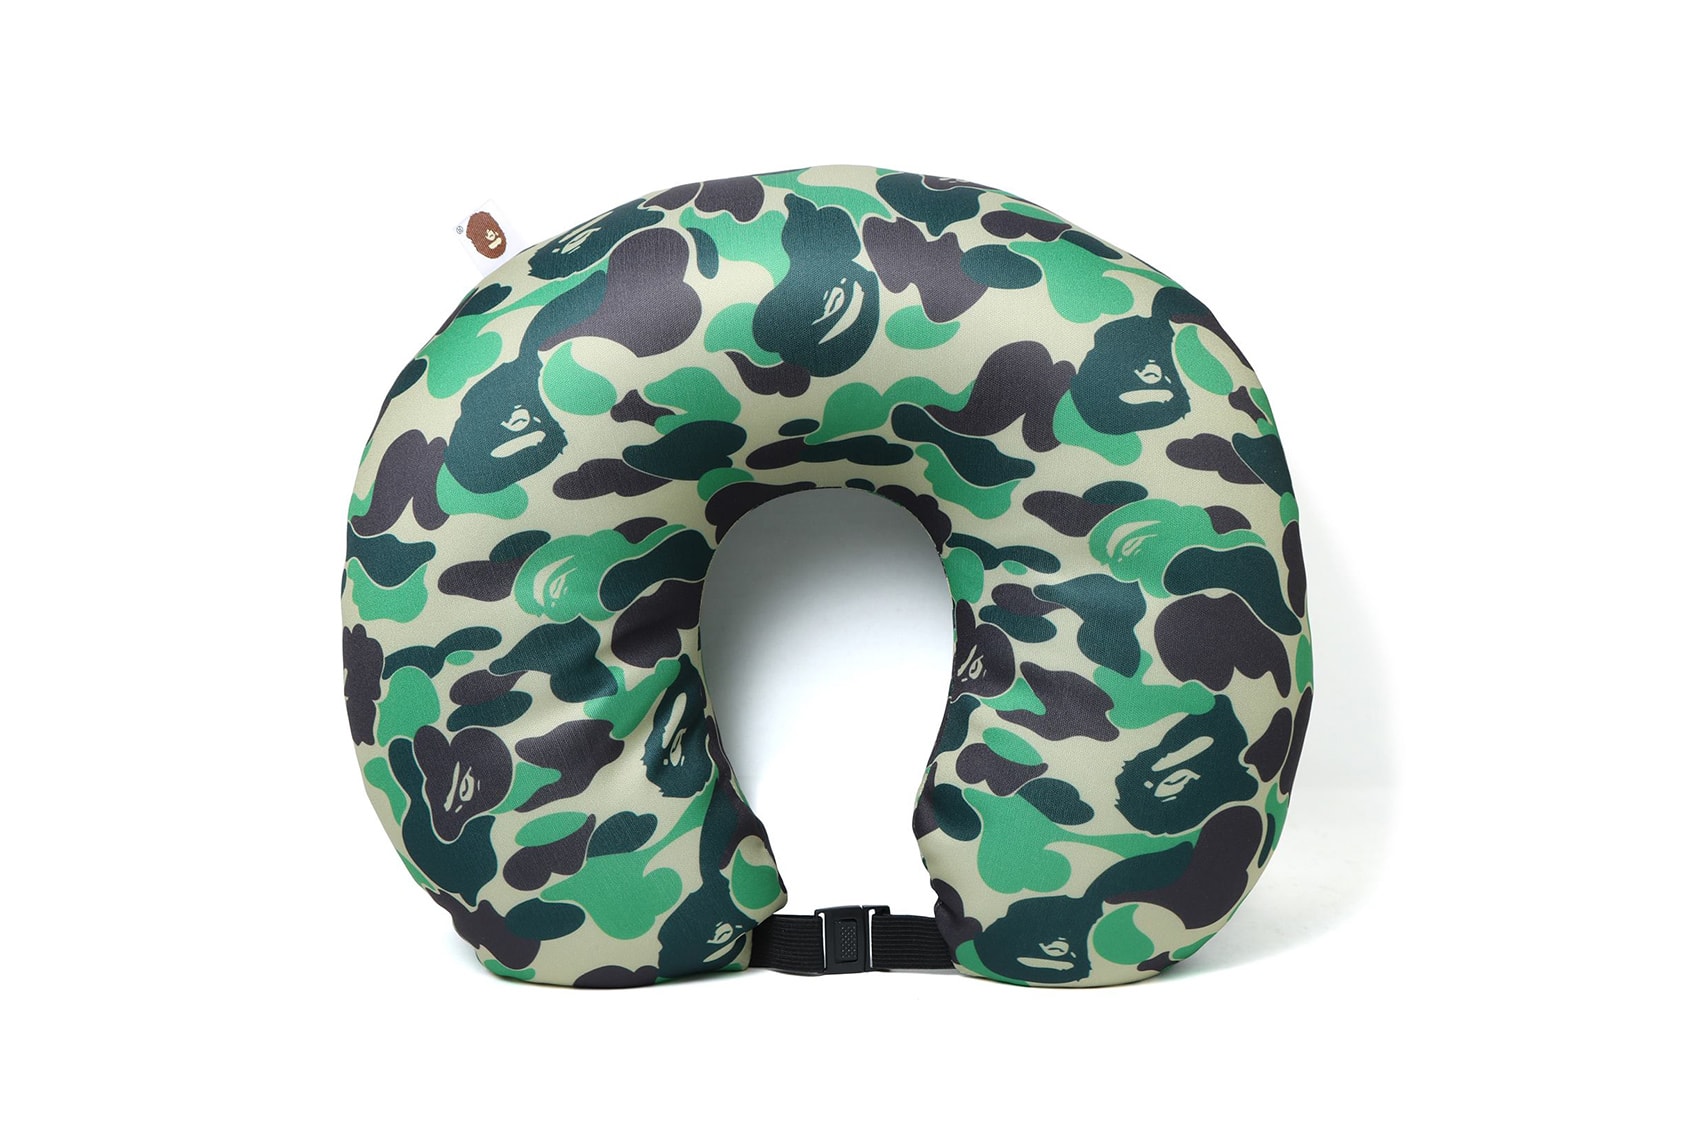 Bape ABC Neck Pillow Release Date A Bathing Ape 2018 February 3 Release Date Info Green Blue Red